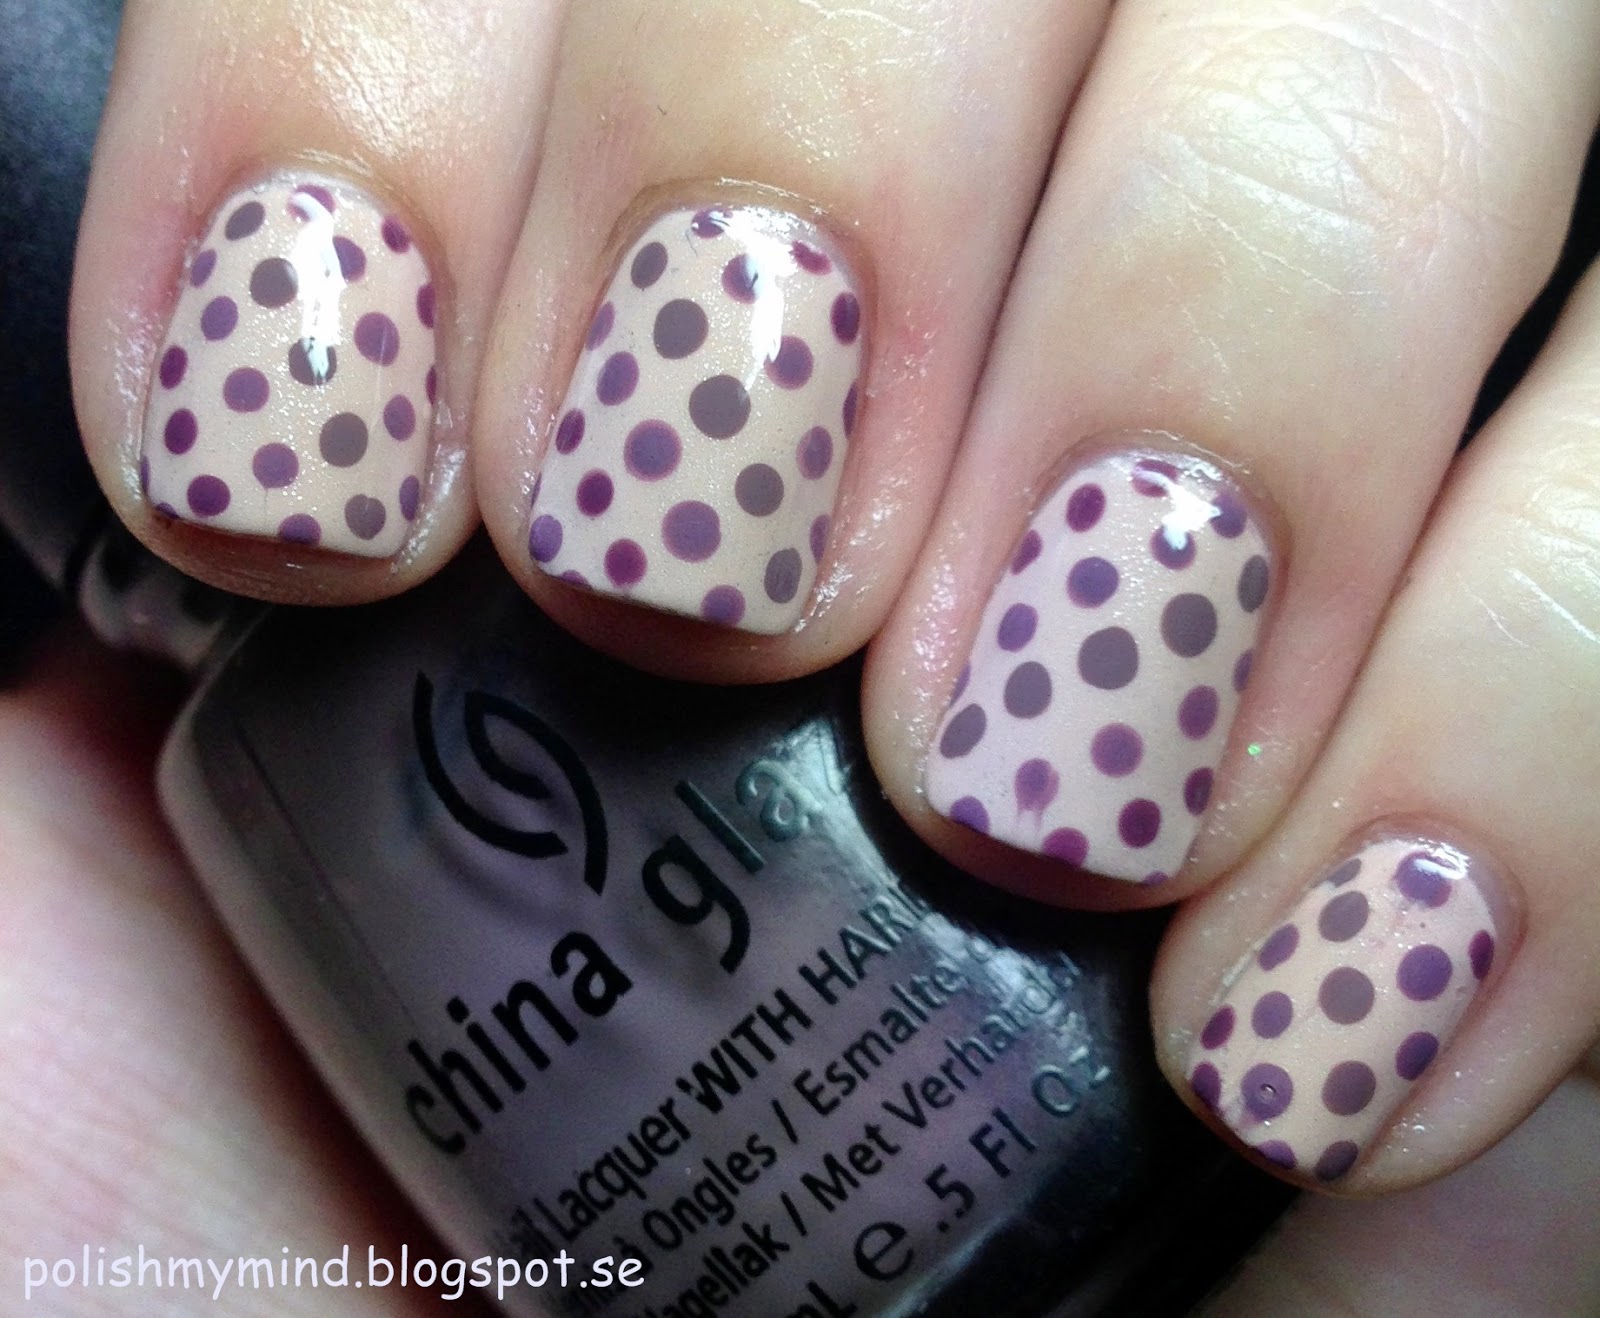 polish my mind: Nude dotticure - more or less.